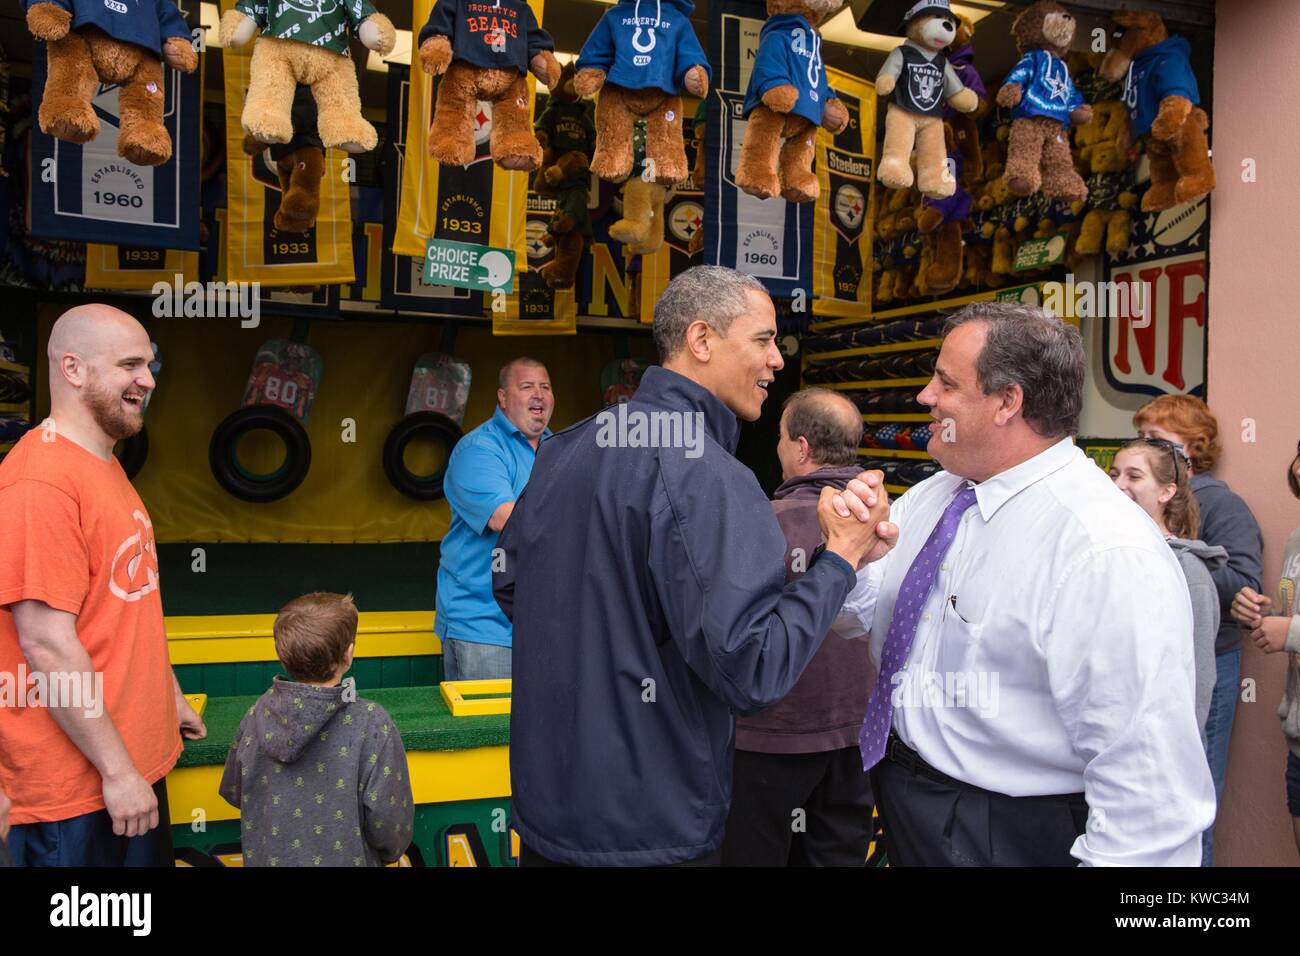 President Obama and Governor Chris Christie playing Arcade Game, 'Touch Down Fever.' They were promoting tourism along the Point Pleasant Boardwalk, helping the New Jersey shore recover from Hurricane Sandy. May 28, 2013. (BSLOC 2015 13 213) Stock Photo